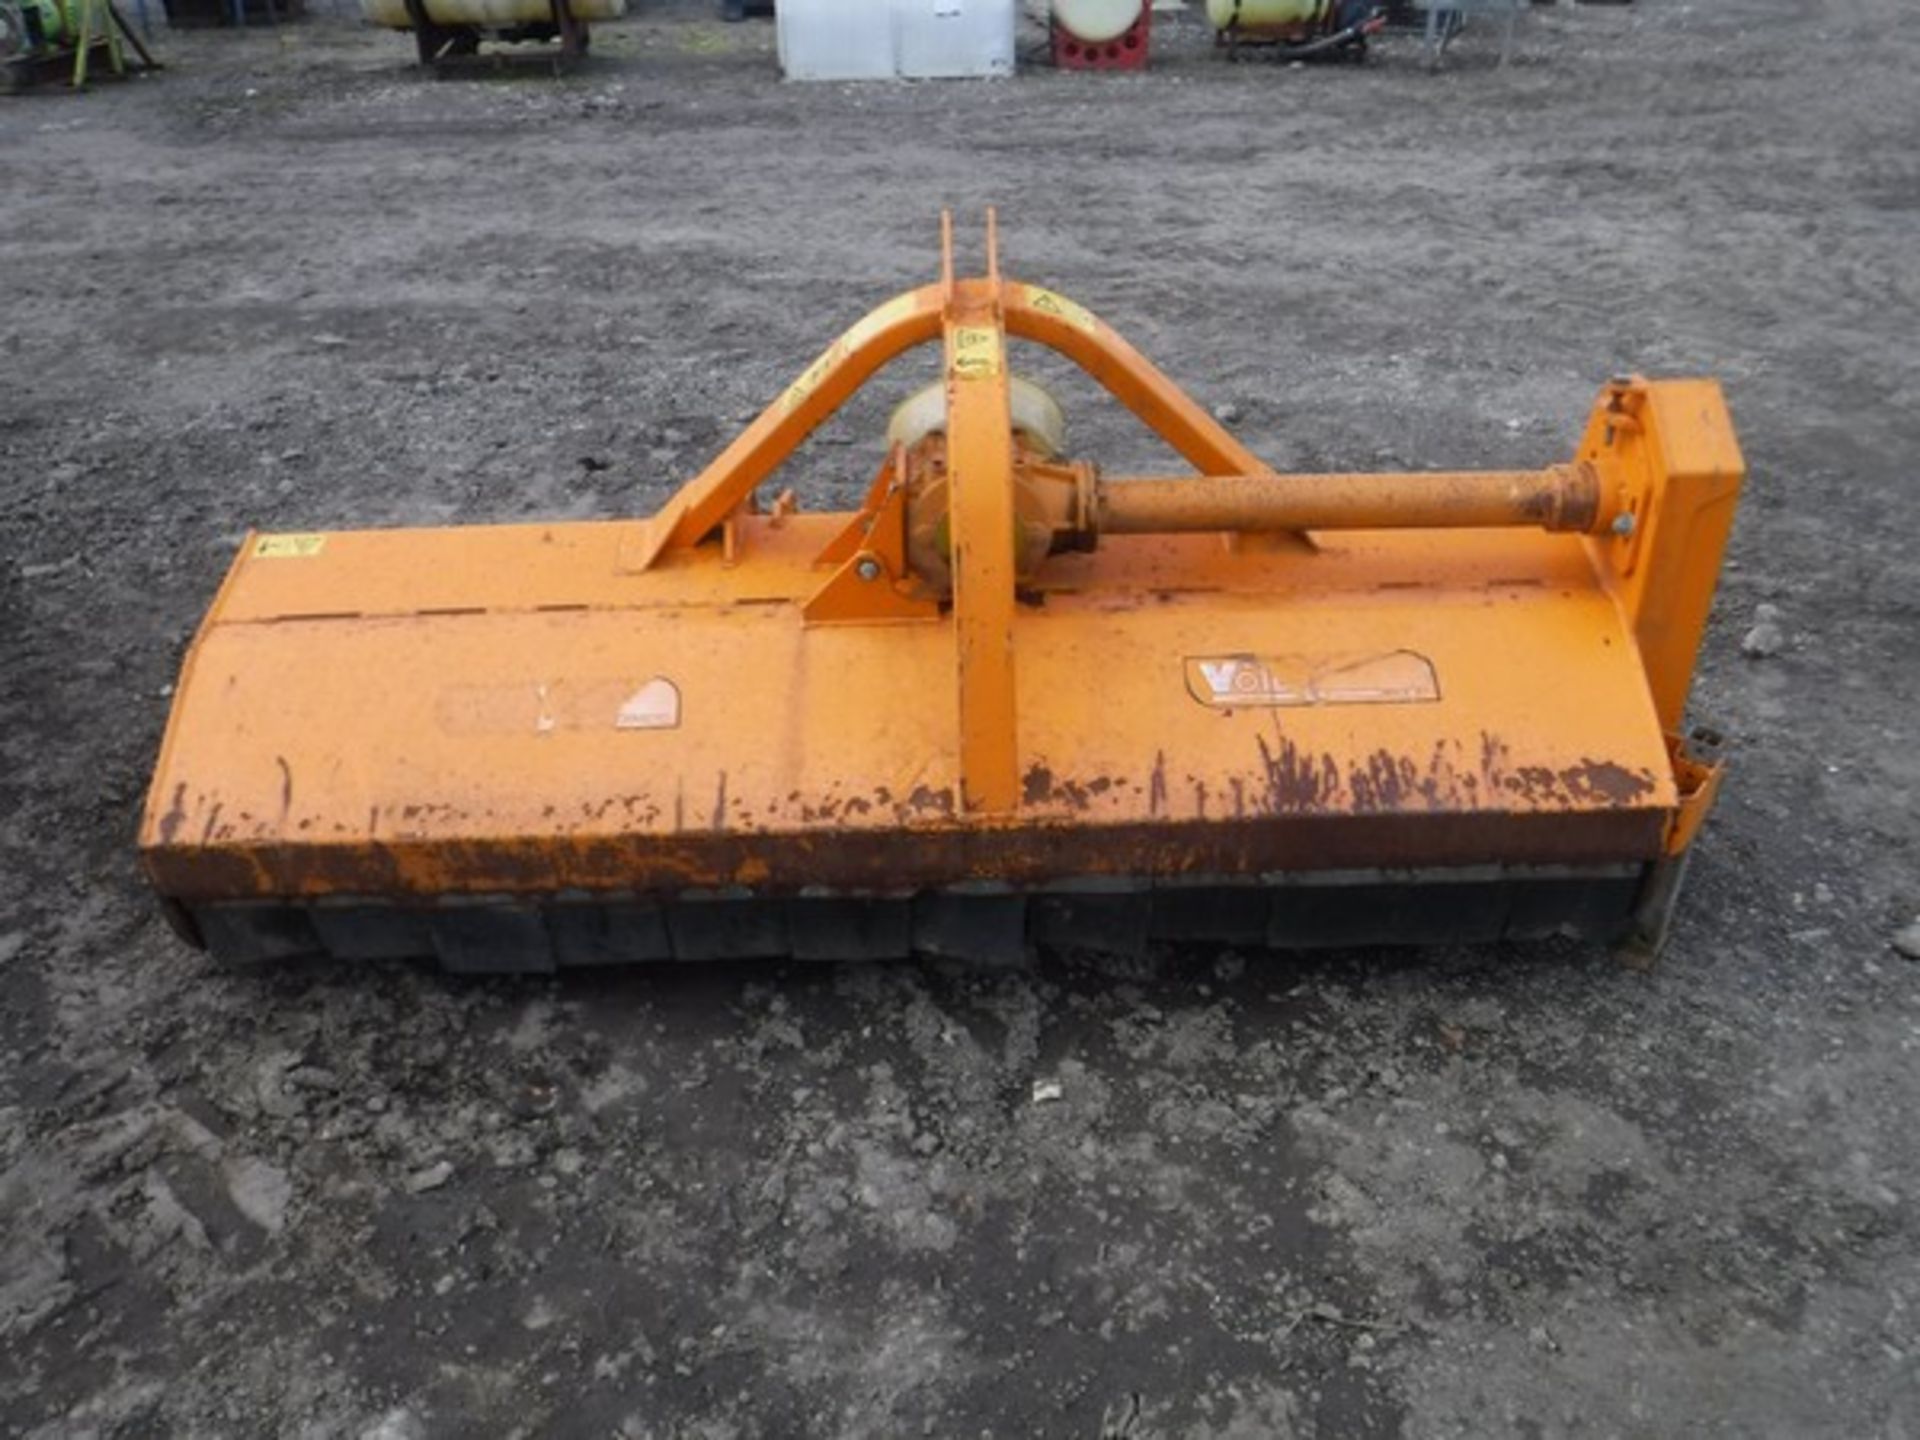 2007 VOTEX front mounted flail mower 2.1M. Type 2101RA. Model RM. S/N 456071H001 - Image 2 of 4